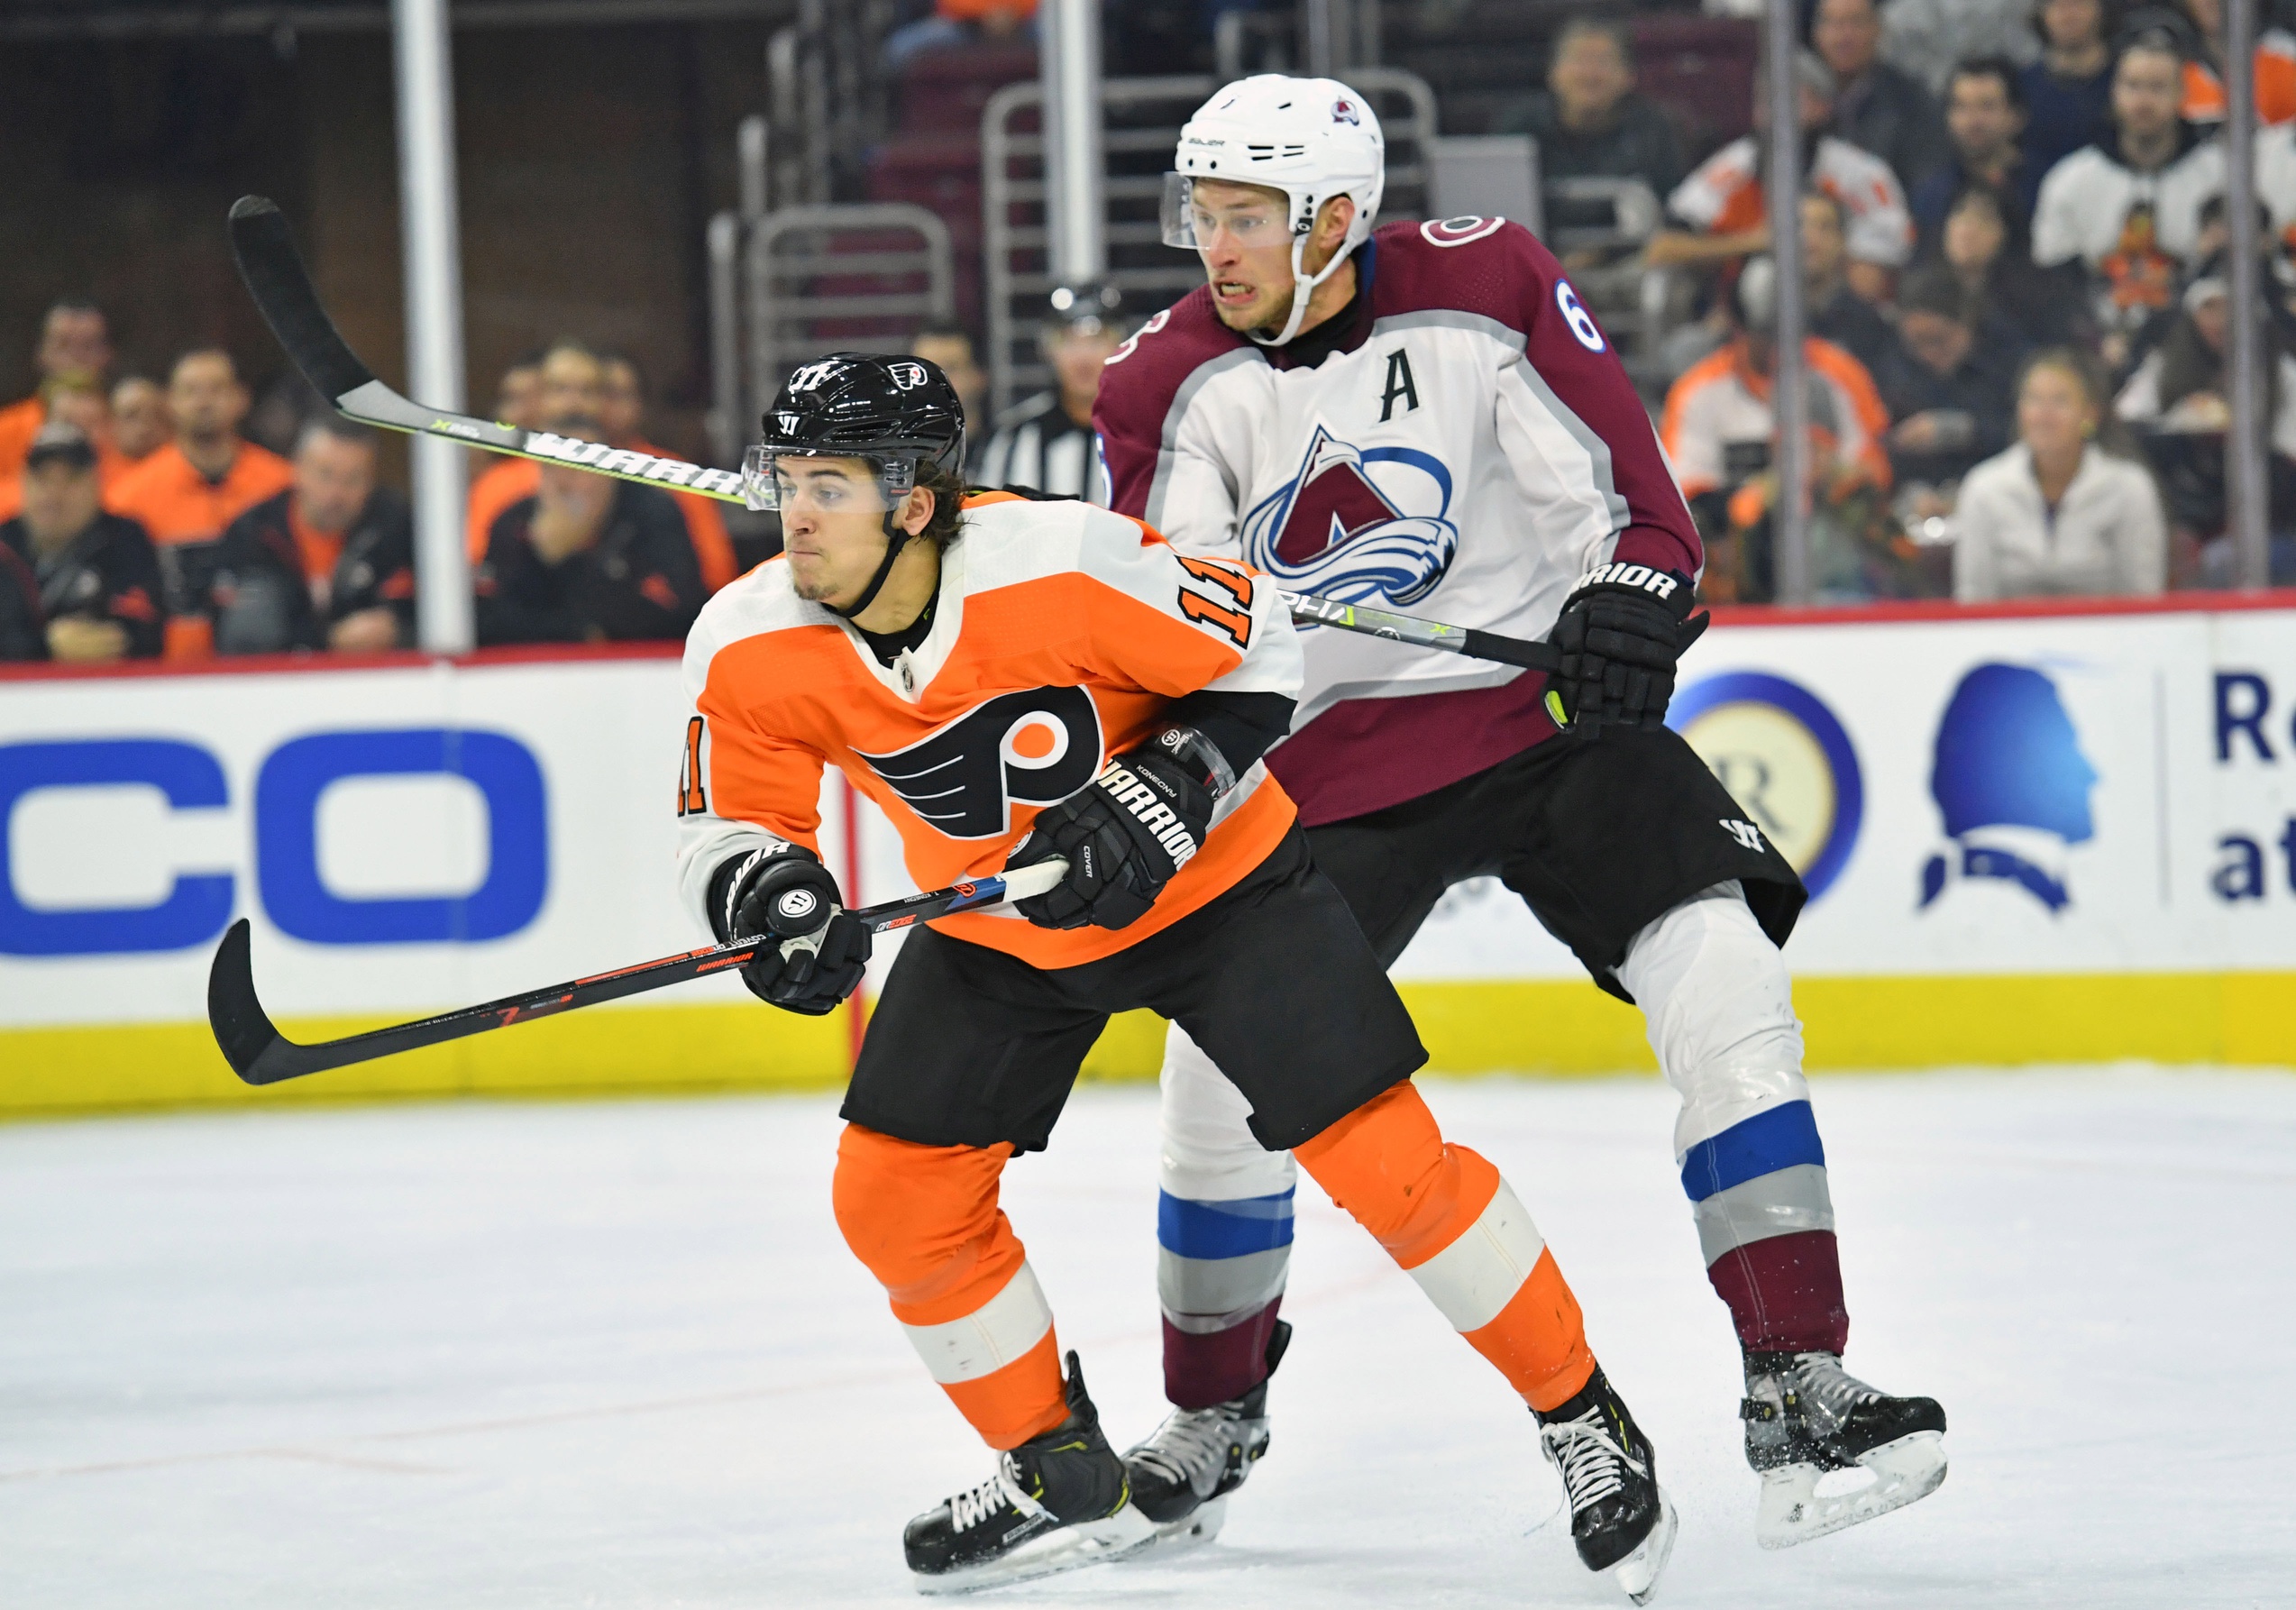 Catching Up With Travis Konecny Ahead of Tonight’s Game